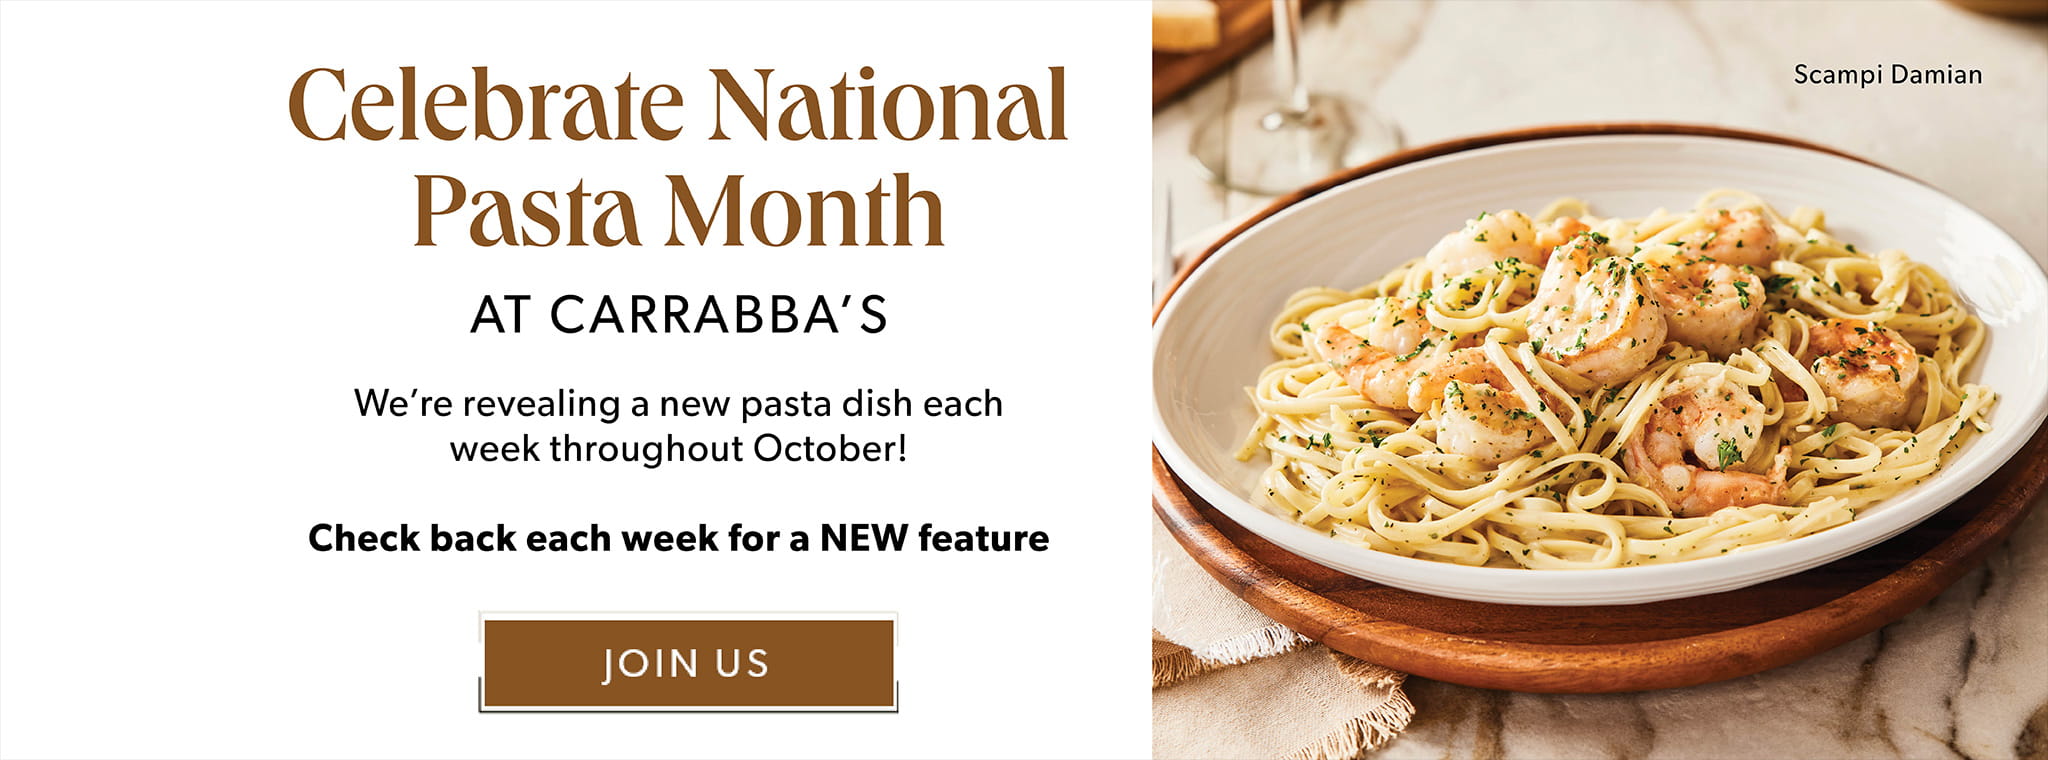 Celebrate National Pasta Month At Carrabba's - We're revealing a new pasta dish each week throughout October!